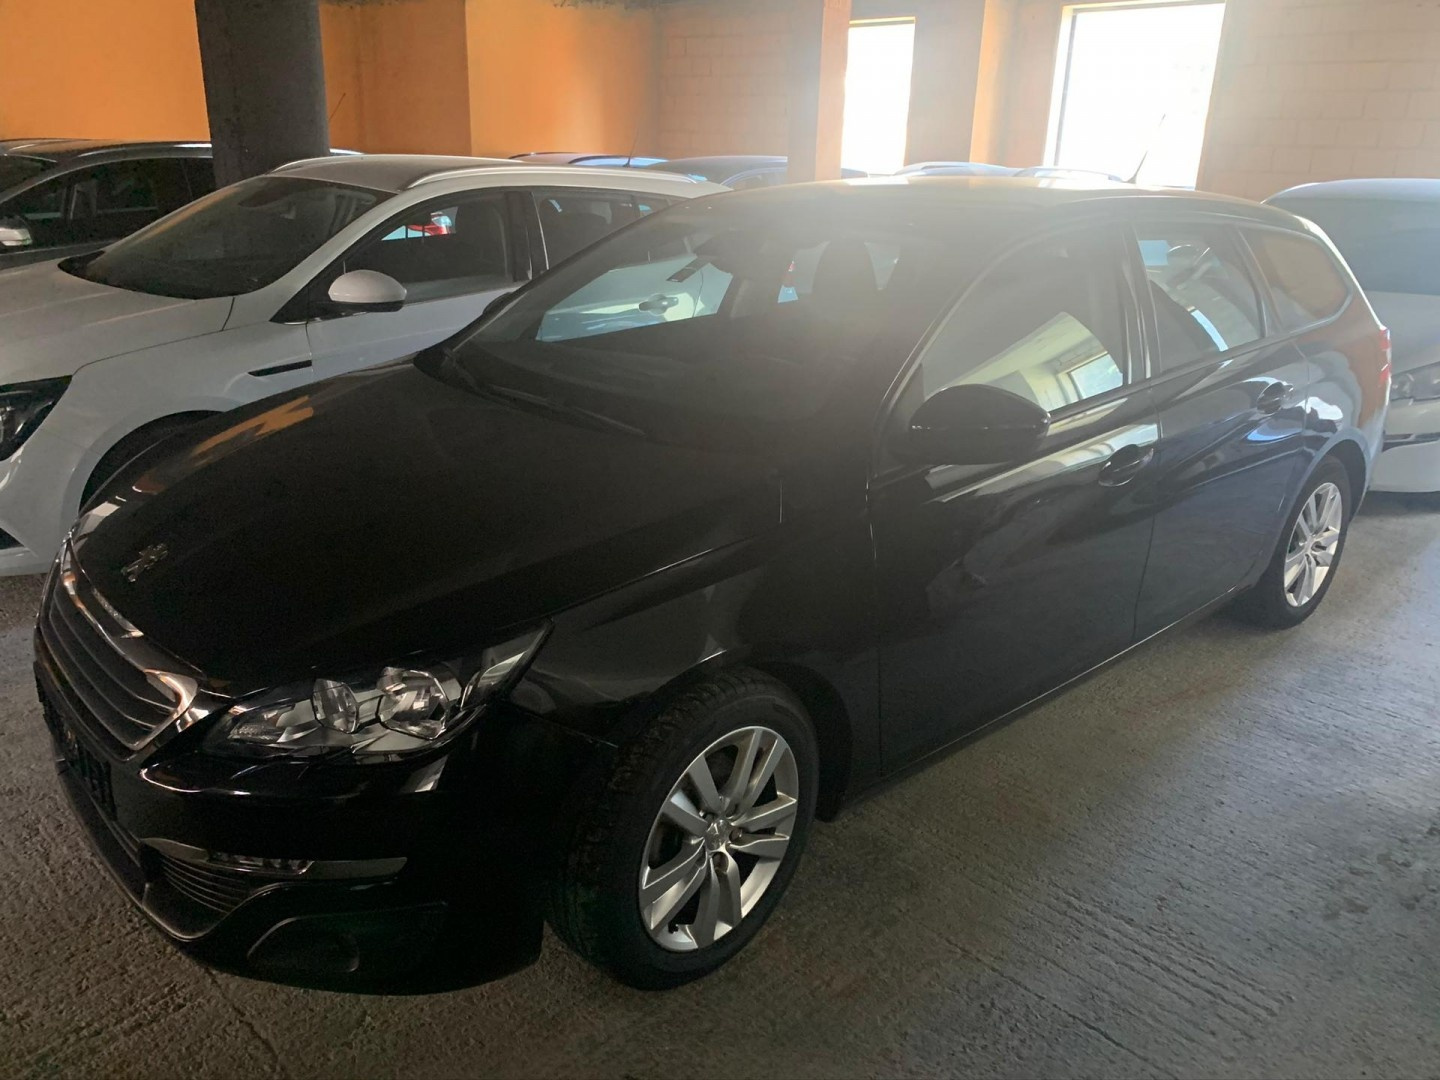 Peugeot 308 SW 1.6 hdi 120 ps   2015